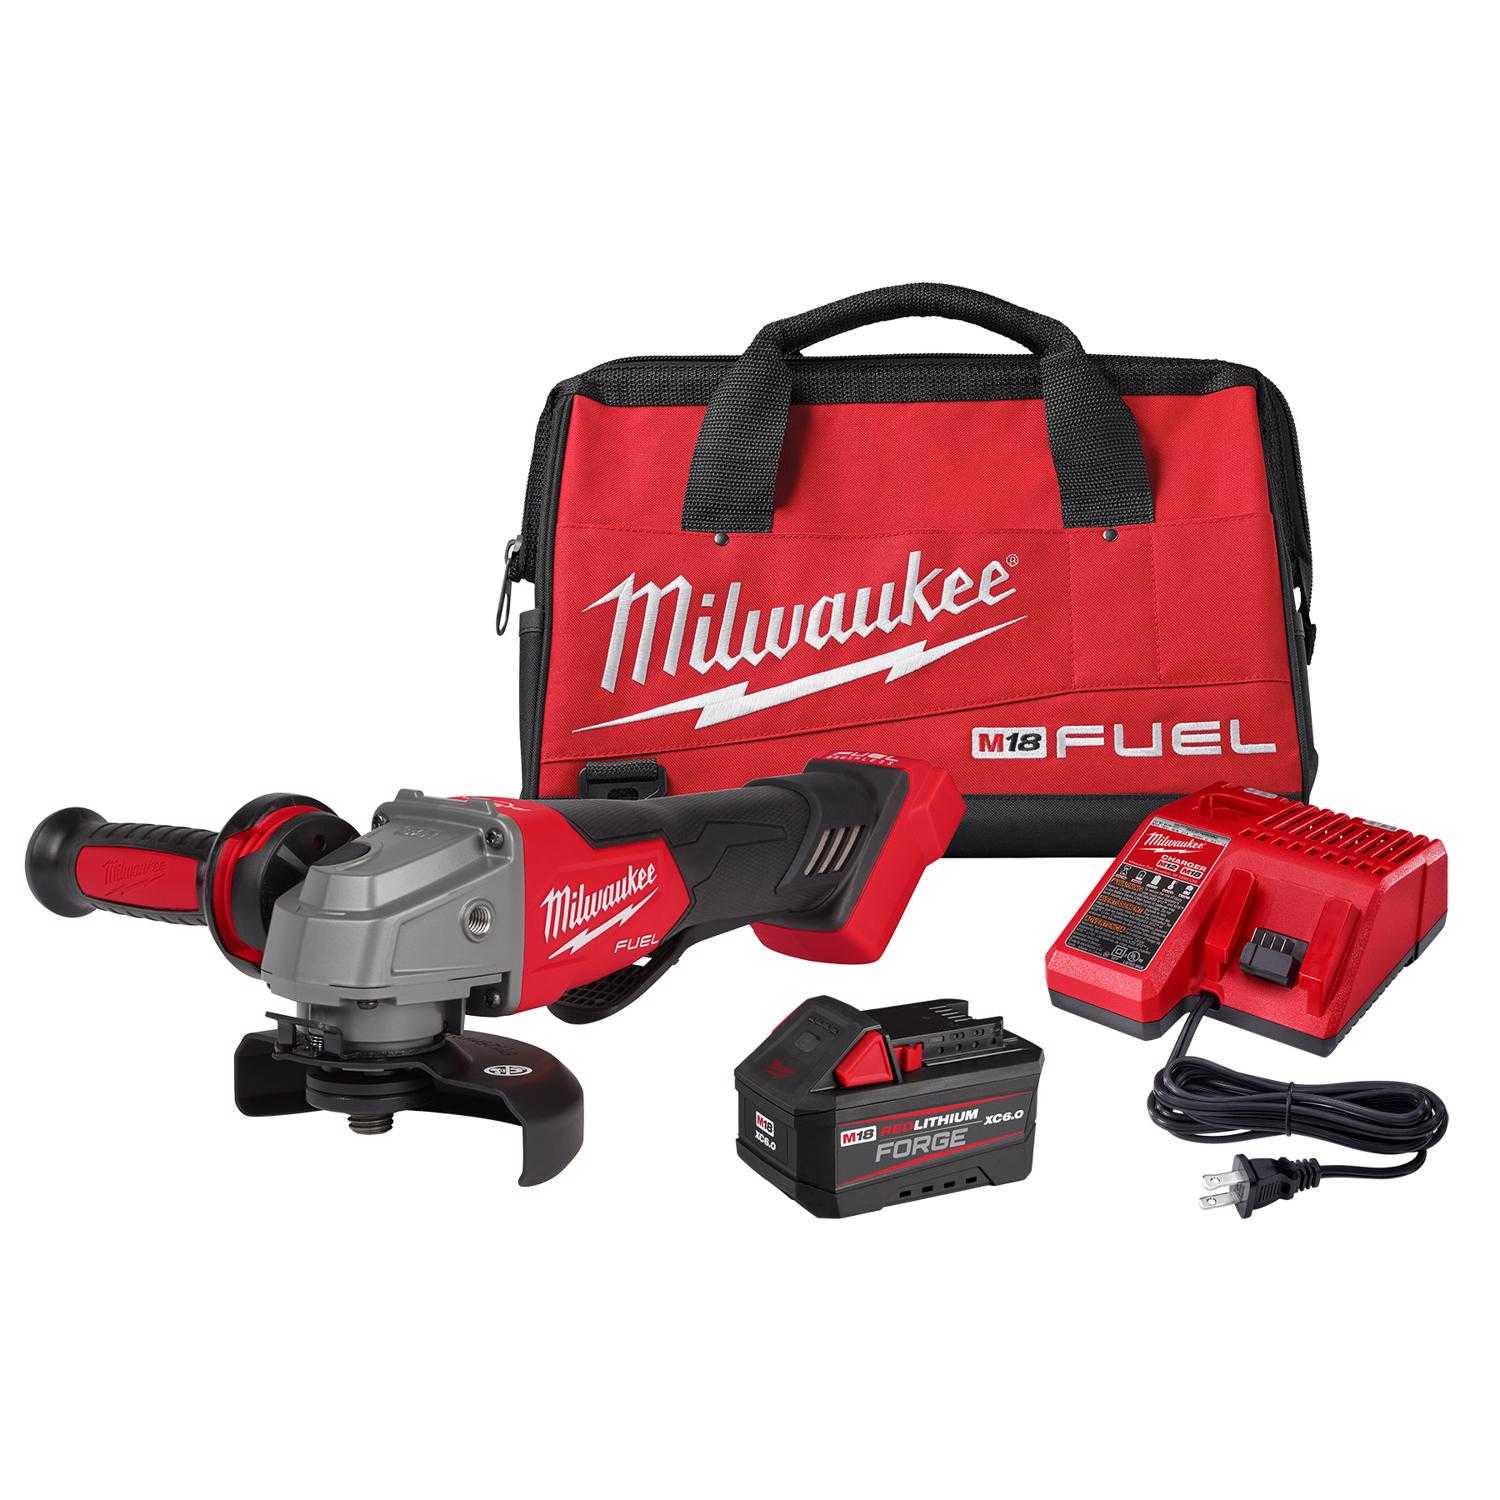 Milwaukee M18 FUEL Cordless 4-1/2 to 5 in. Angle Grinder Kit (Battery & Charger)